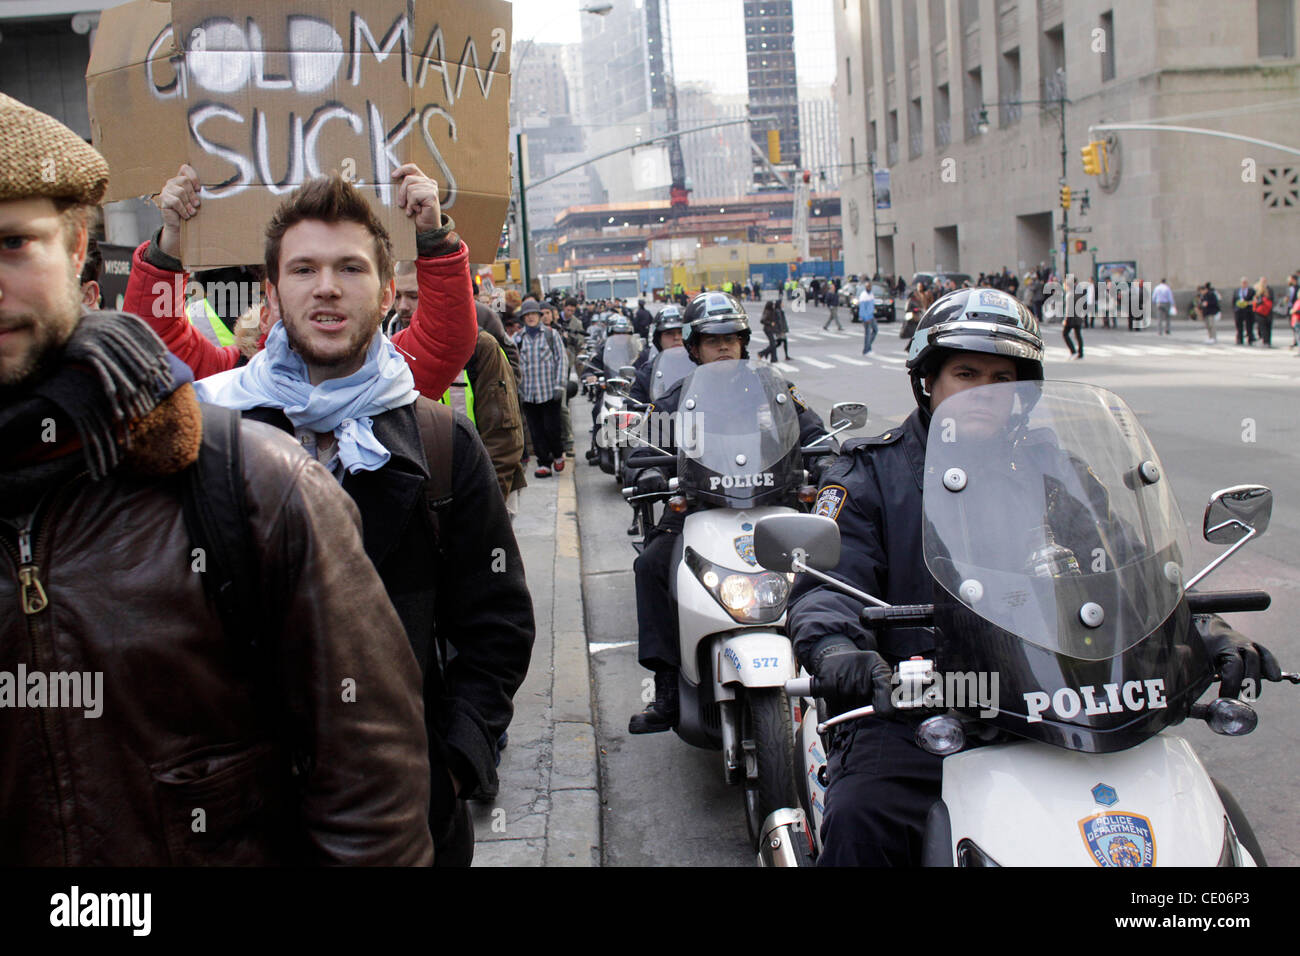 Occupy Wall Street protesters march to the offices of the massive financial firm Goldman Sachs who they say should be put on trial for fraud and corruption related to housing foreclosures, pension losses, and student debt. Stock Photo